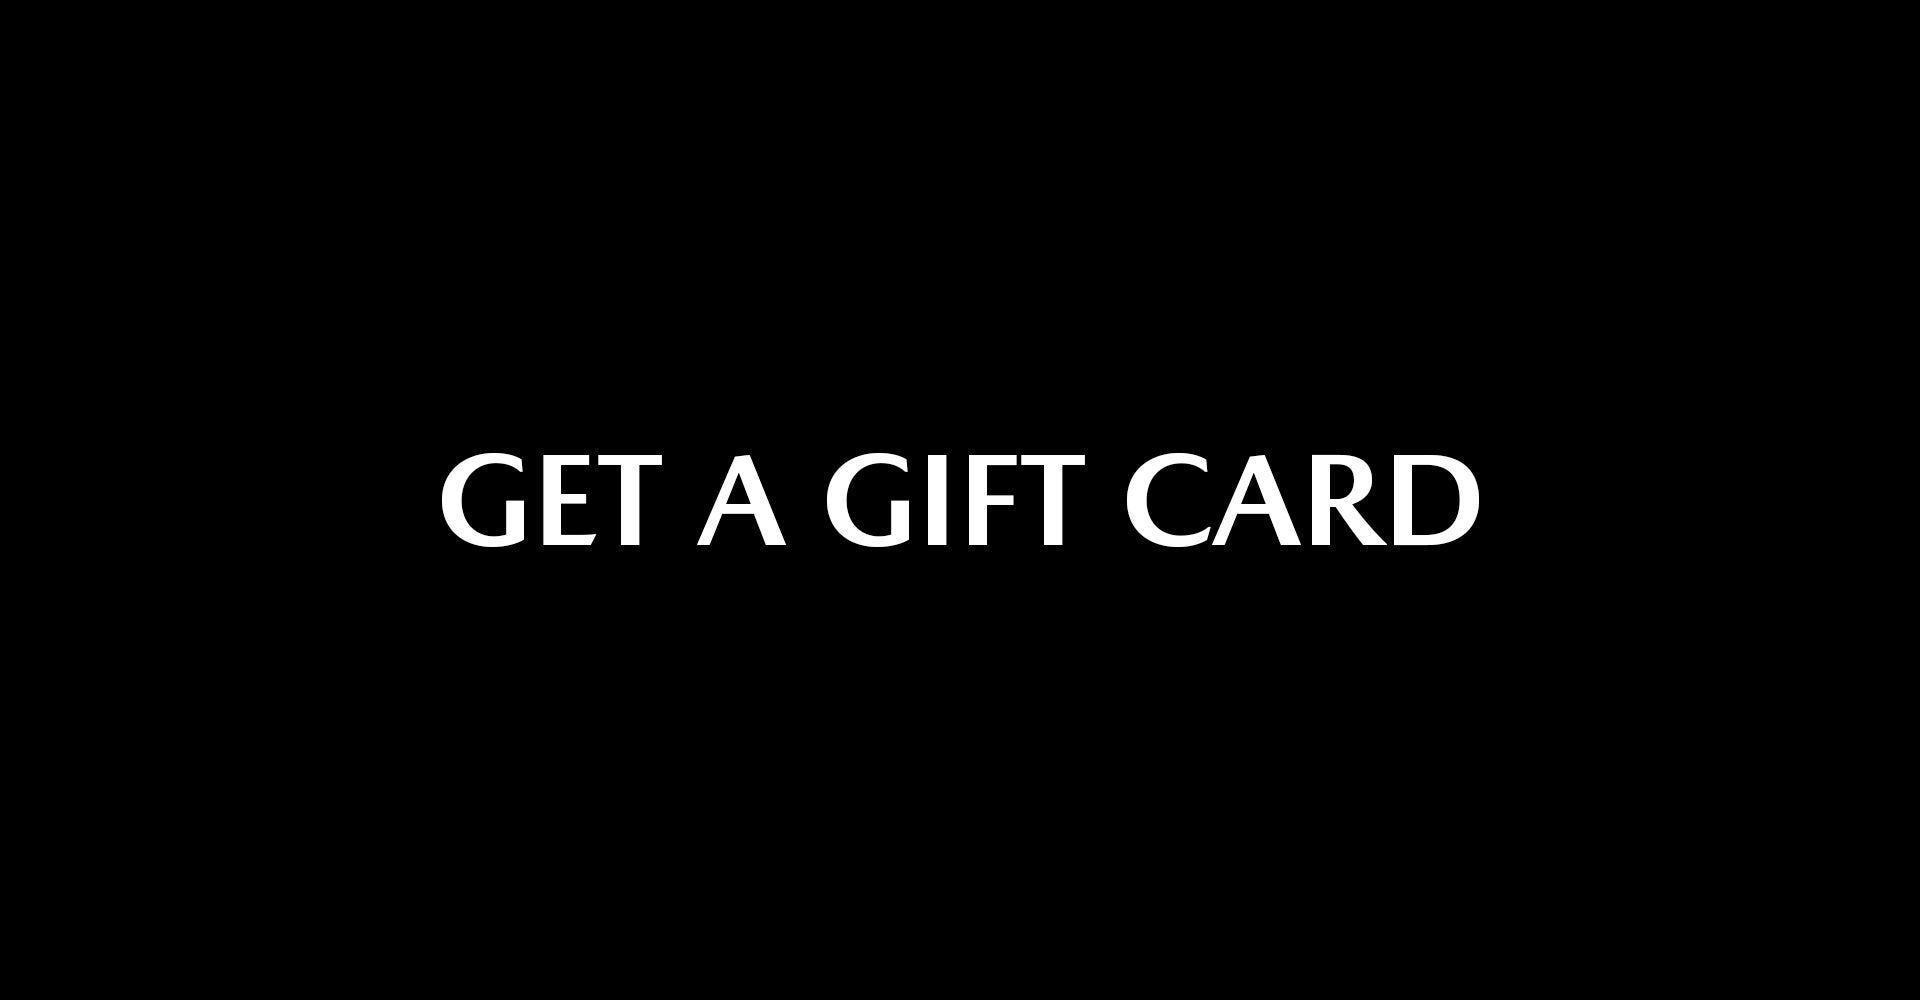 PAG Gift Cards